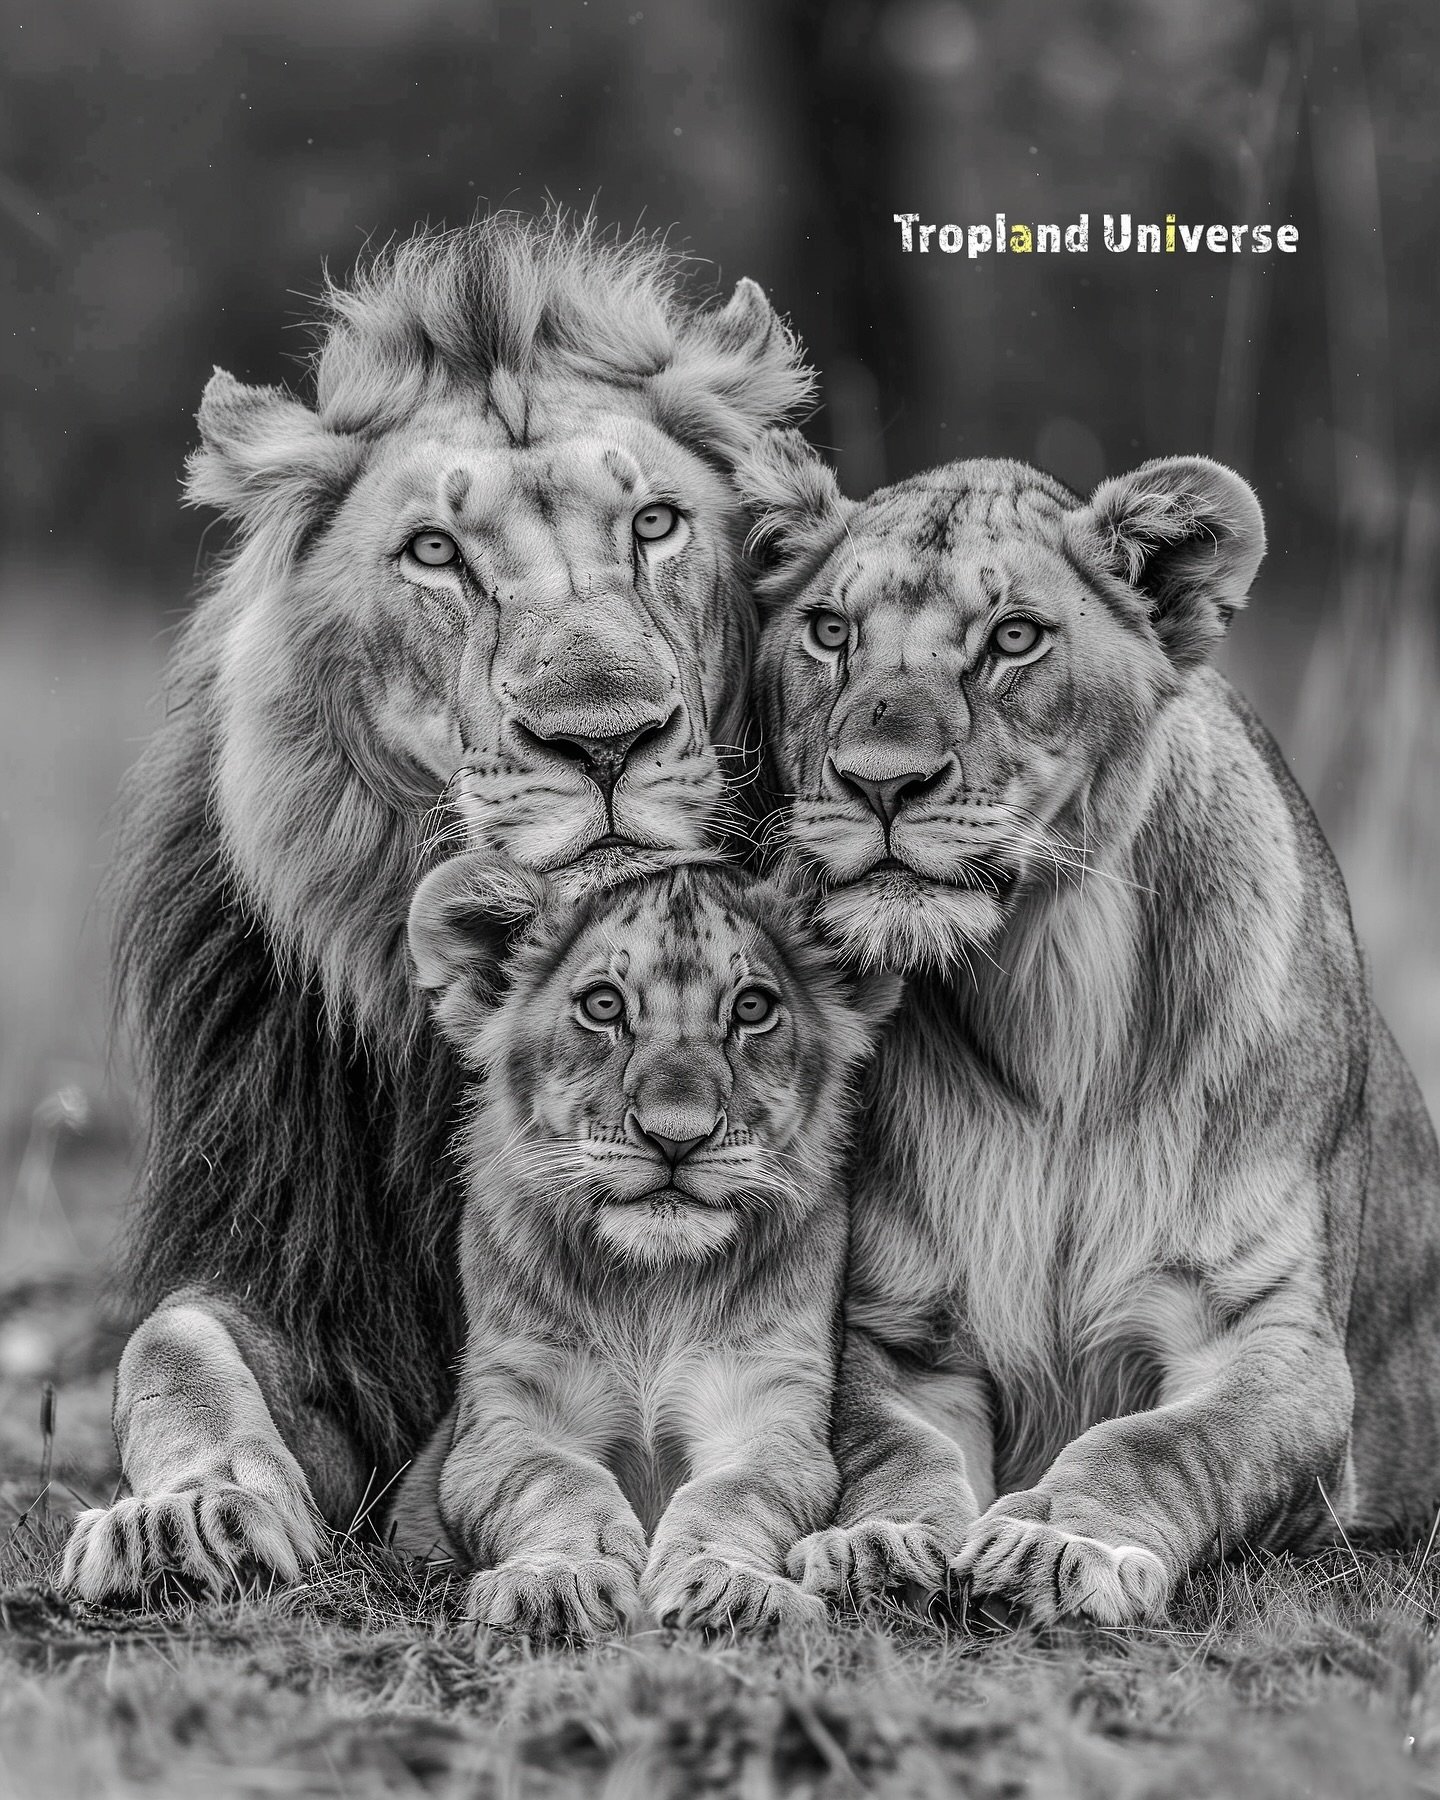 A Brazilian saying that resonates deeply: &lsquo;Fam&iacute;lia &eacute; tudo&rsquo; &mdash; Family is everything. Appreciate the bonds that tie us together, wherever we are in the world. 🌍💖

🦁 Be sure to follow me @troplanduniverse for more just 